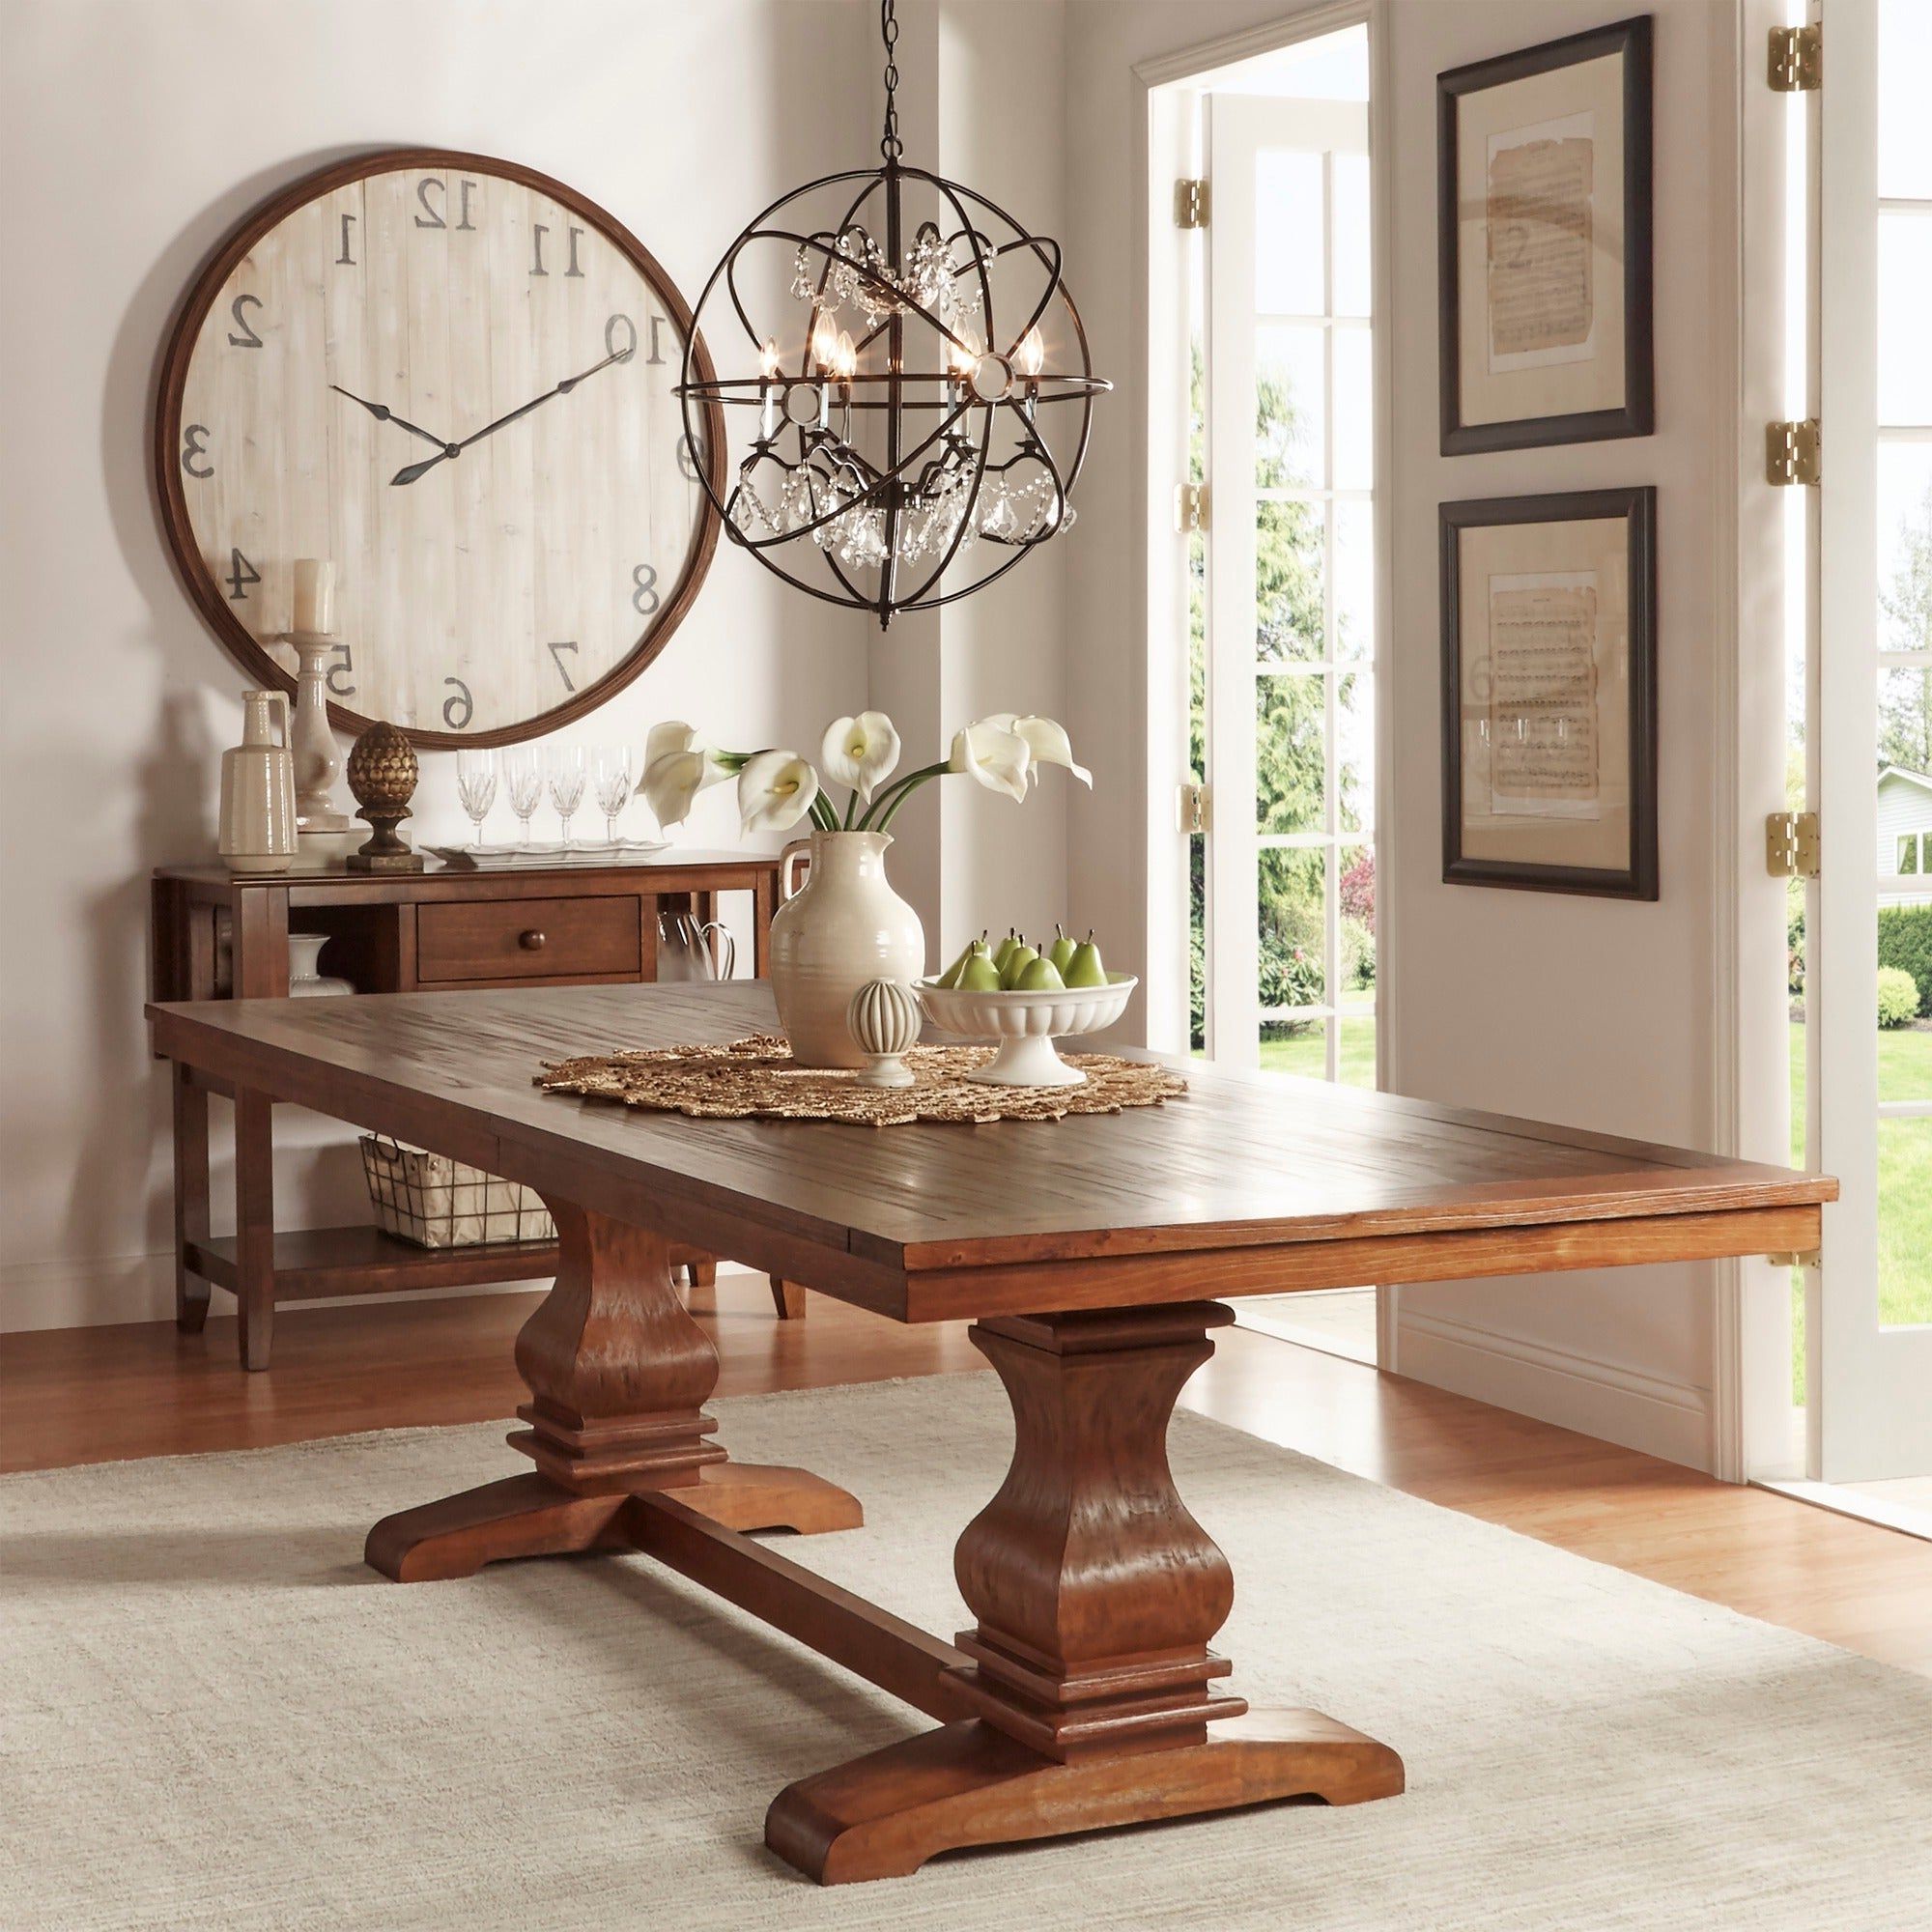 Atelier Burnished Brown Pedestal Extending Dining Tableinspire Q Classic Intended For Latest Black Wash Banks Extending Dining Tables (View 20 of 25)